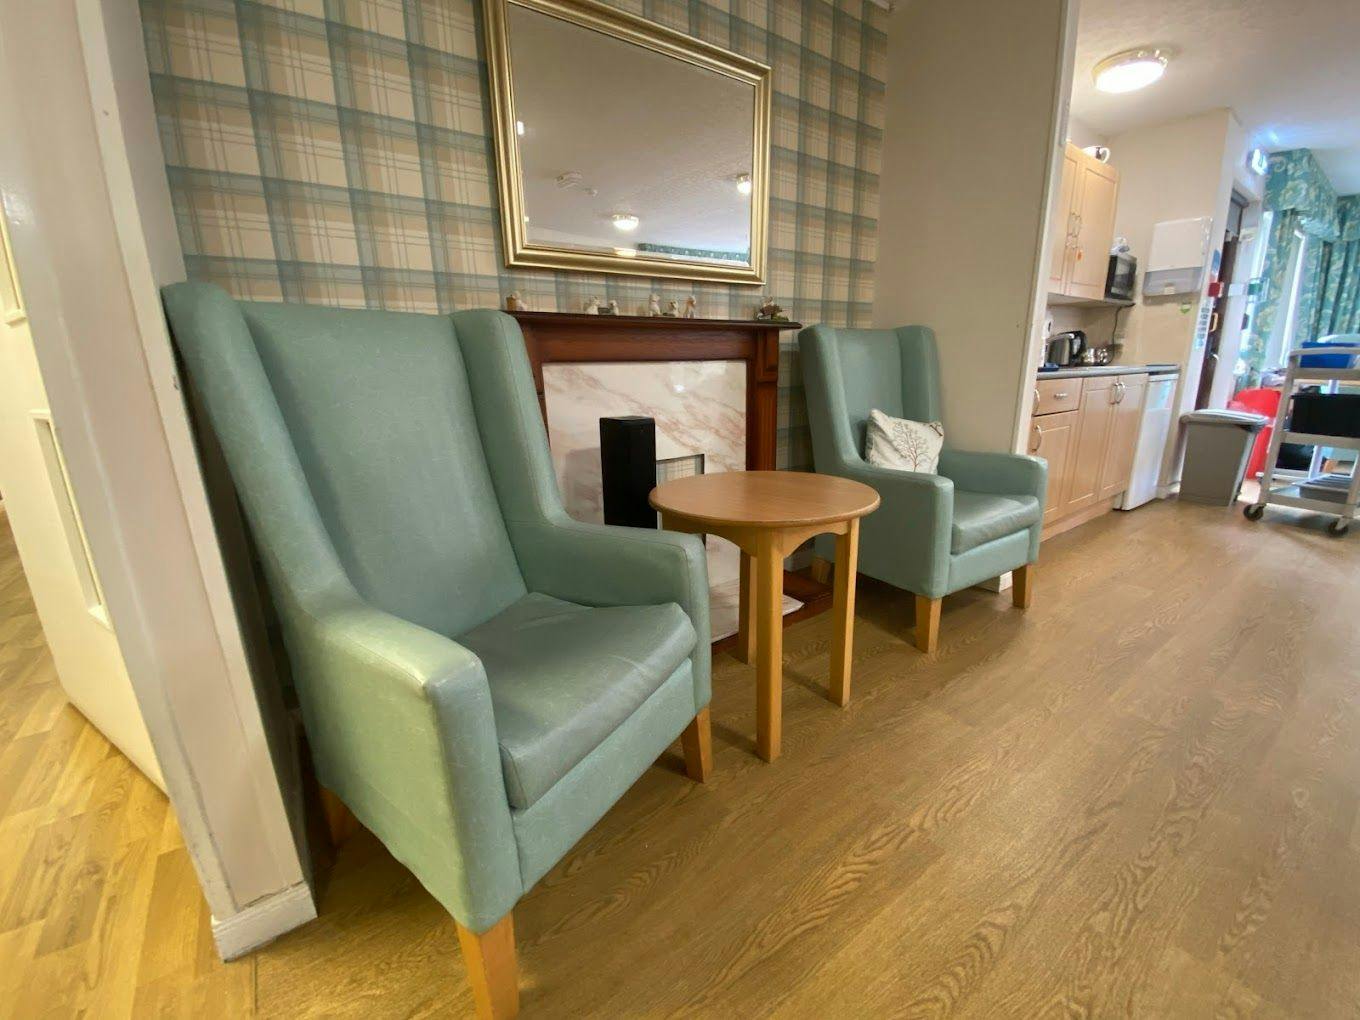 Independent Care Home - Laurels Lodge care home 2